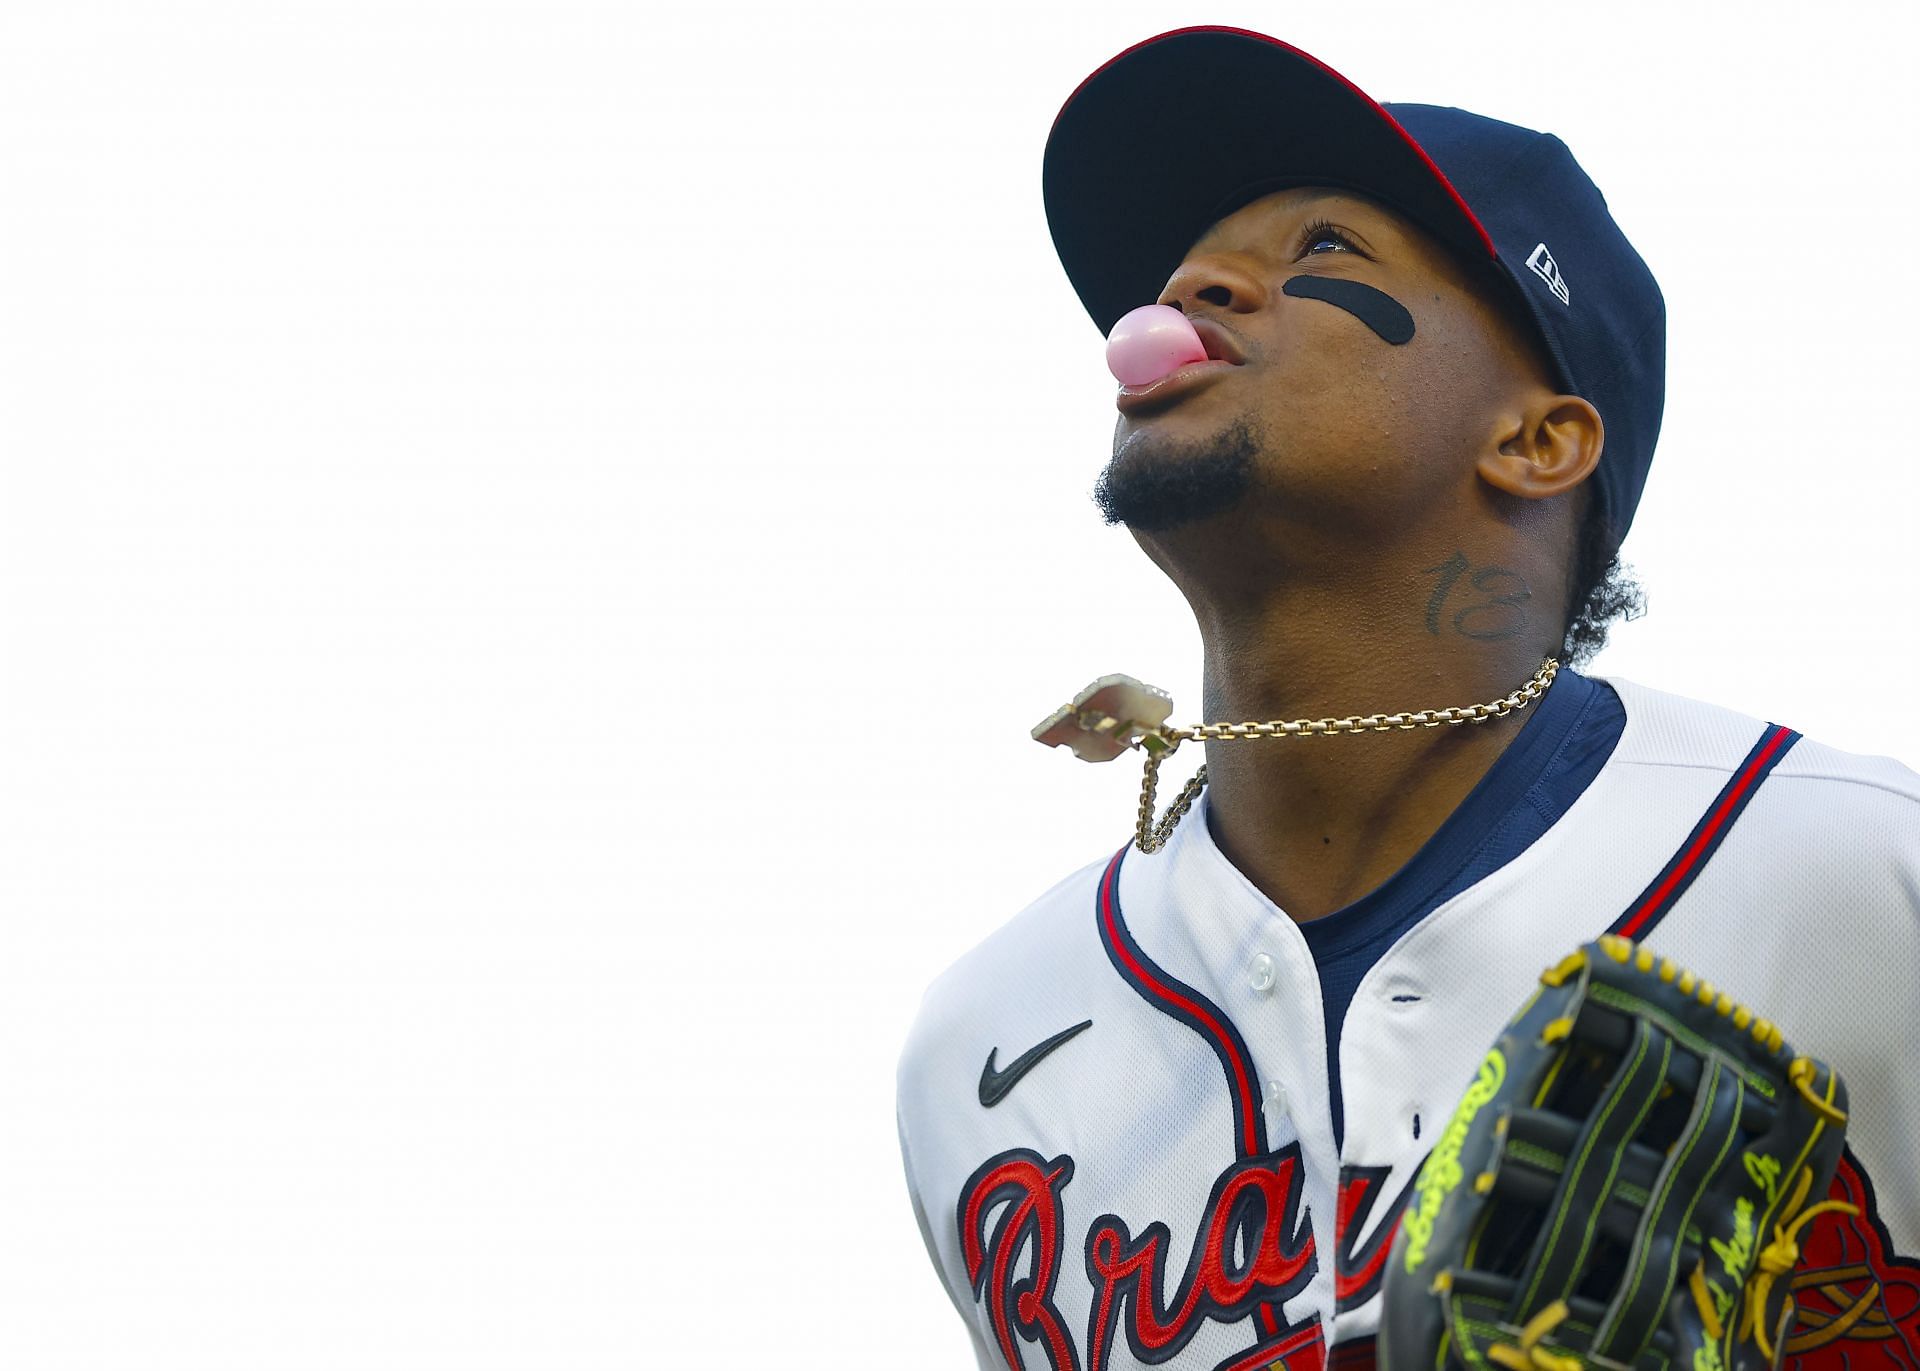 Atlanta Braves outfielder Ronald Acuna Jr. recently starred in a Snickers bar commerical